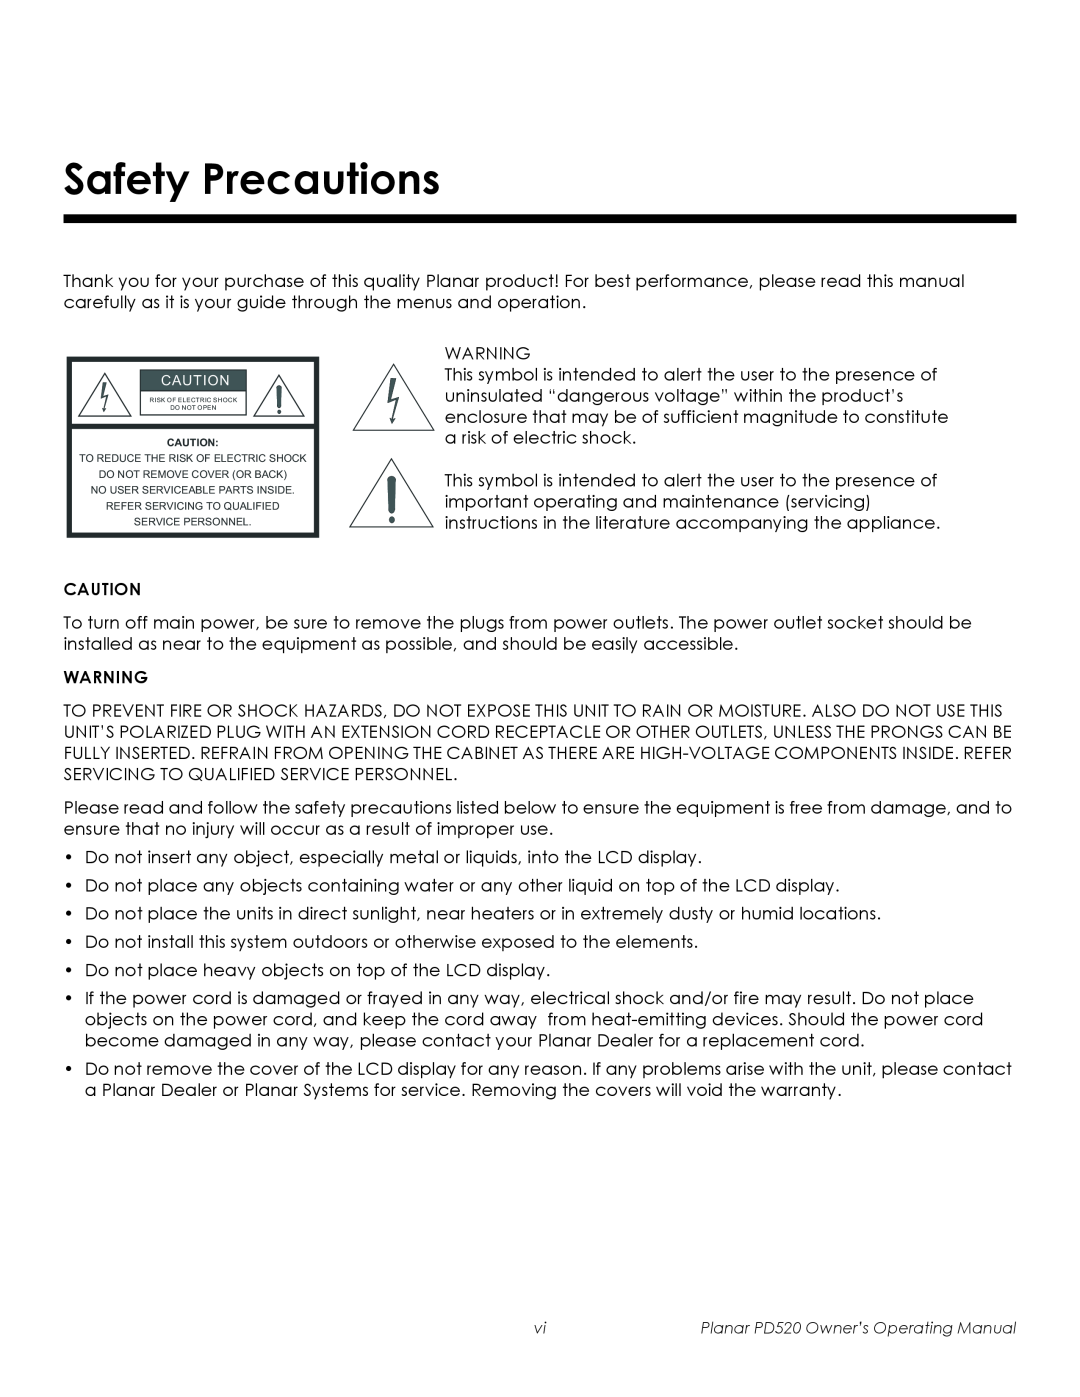 Planar manual Safety Precautions, Planar PD520 Owner’s Operating Manual 